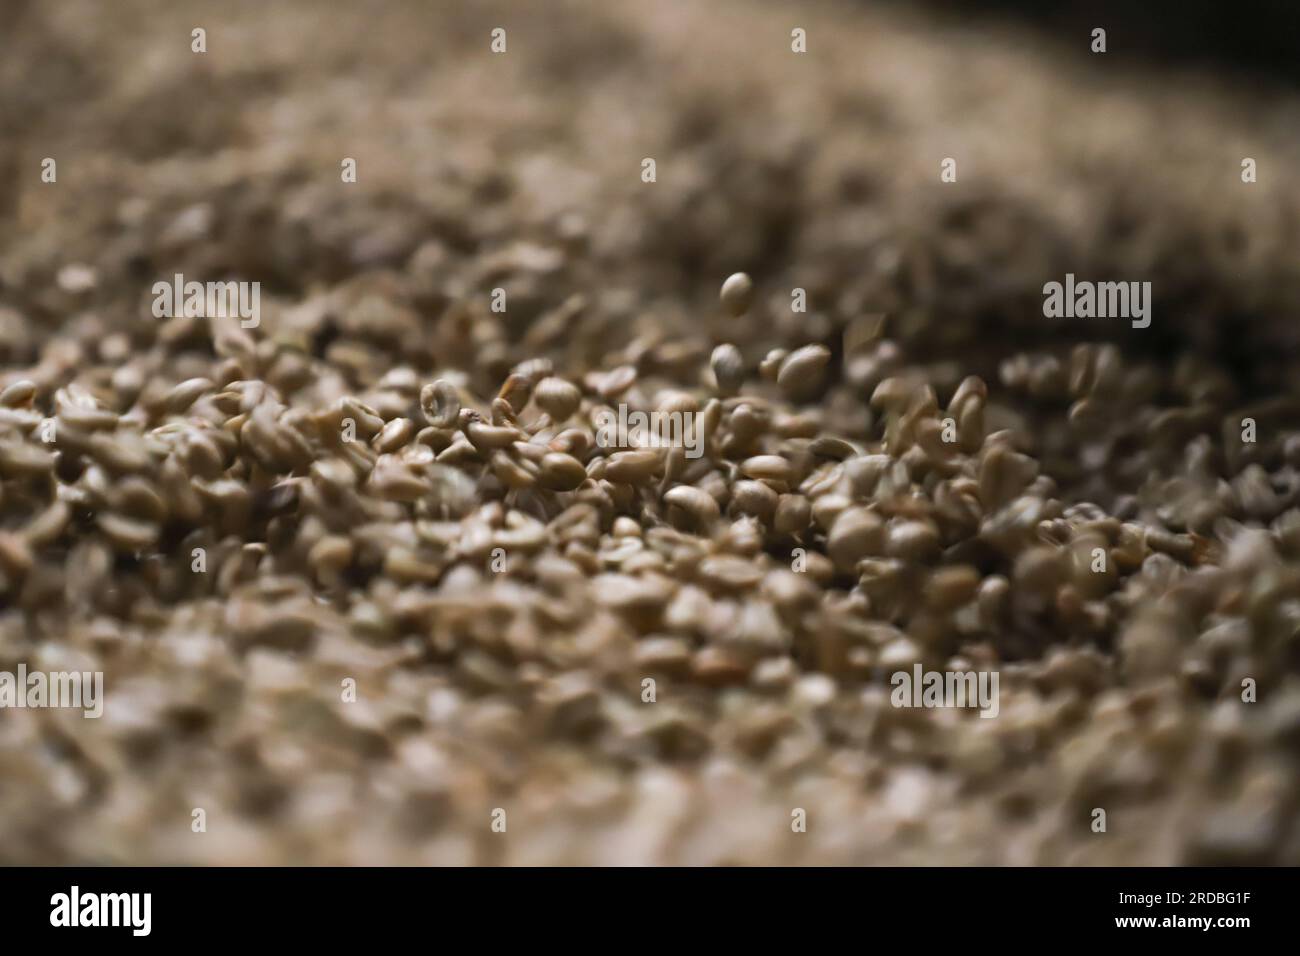 (230720) -- ADDIS ABABA, July 20, 2023 (Xinhua) -- This photo taken on July 1, 2023 shows coffee beans at Mullege Public Limited Company, a family-owned Ethiopian business engaged in coffee processing and export, in Addis Ababa, Ethiopia. China has held the position of Africa's largest trading partner for 14 consecutive years. Along the way, China and Africa collaboratively advance the development under the Belt and Road Initiative, opening up new avenues for cooperation. African coffee, known for its high quality, has made its way into the lives of Chinese consumers. In 2022, the Gaoqiao Gra Stock Photo